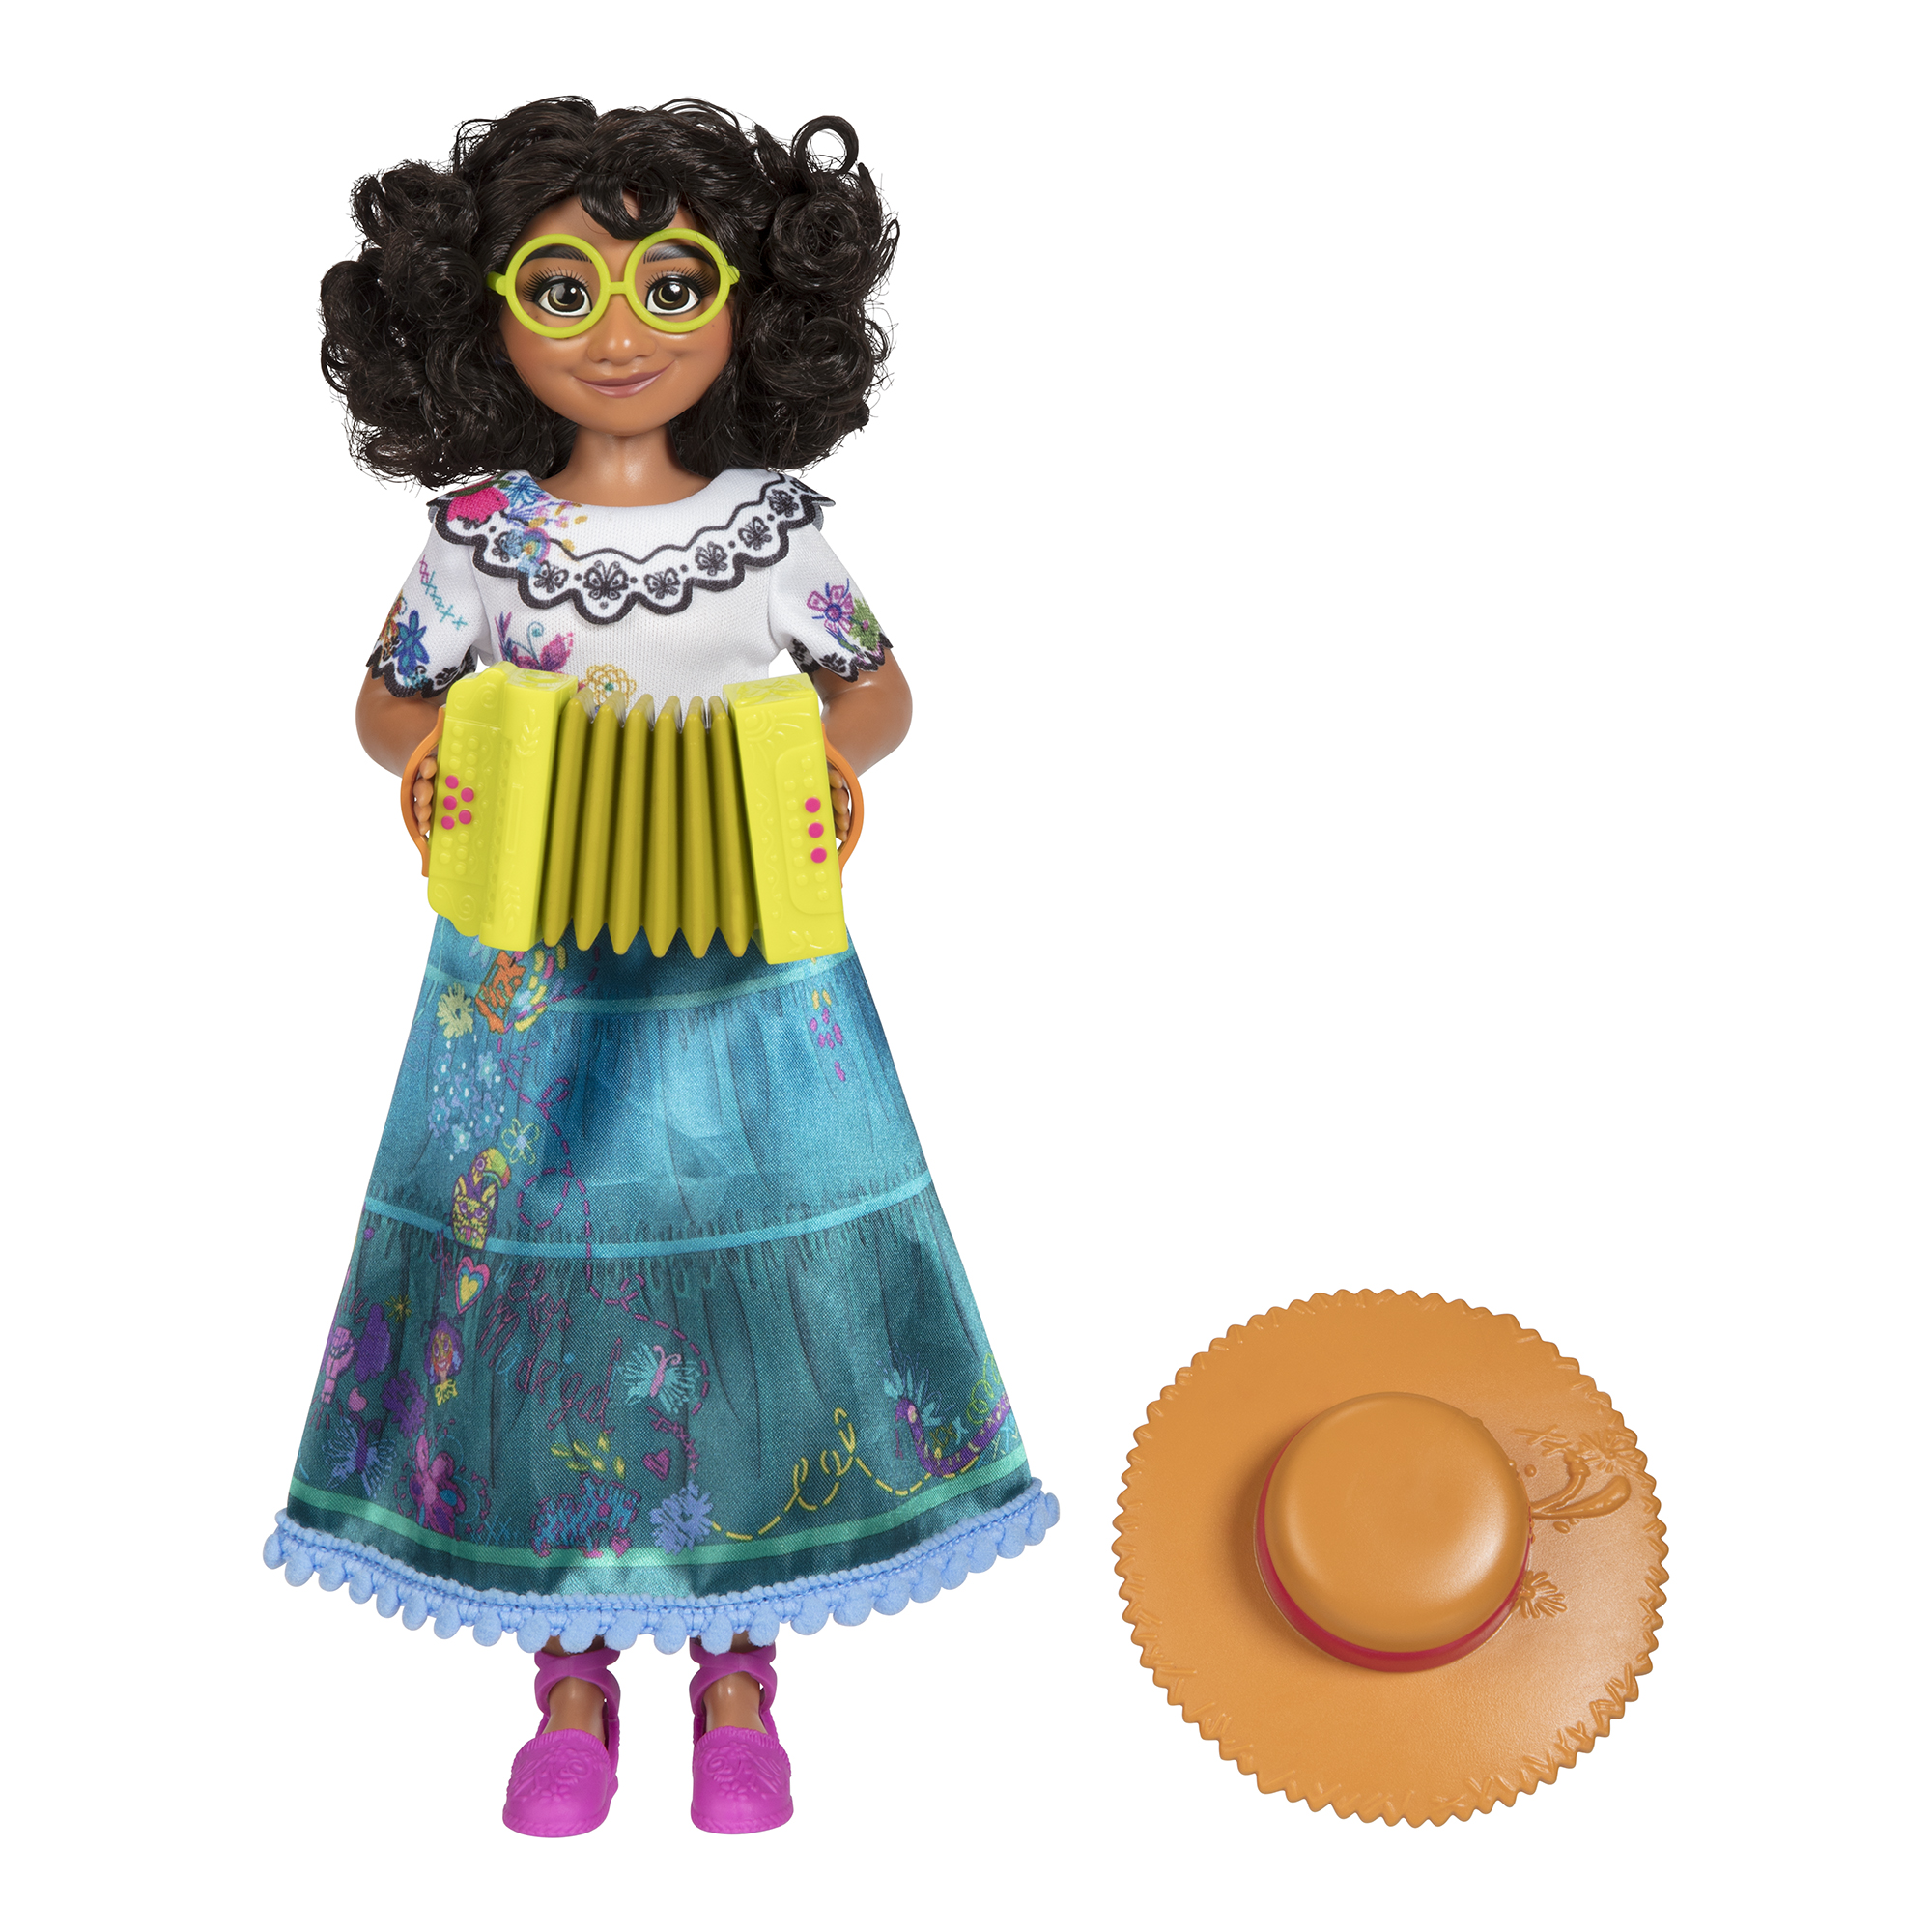 Disney Encanto Sing & Play Mirabel Feature Doll, Sings Music From Disney'S Encanto